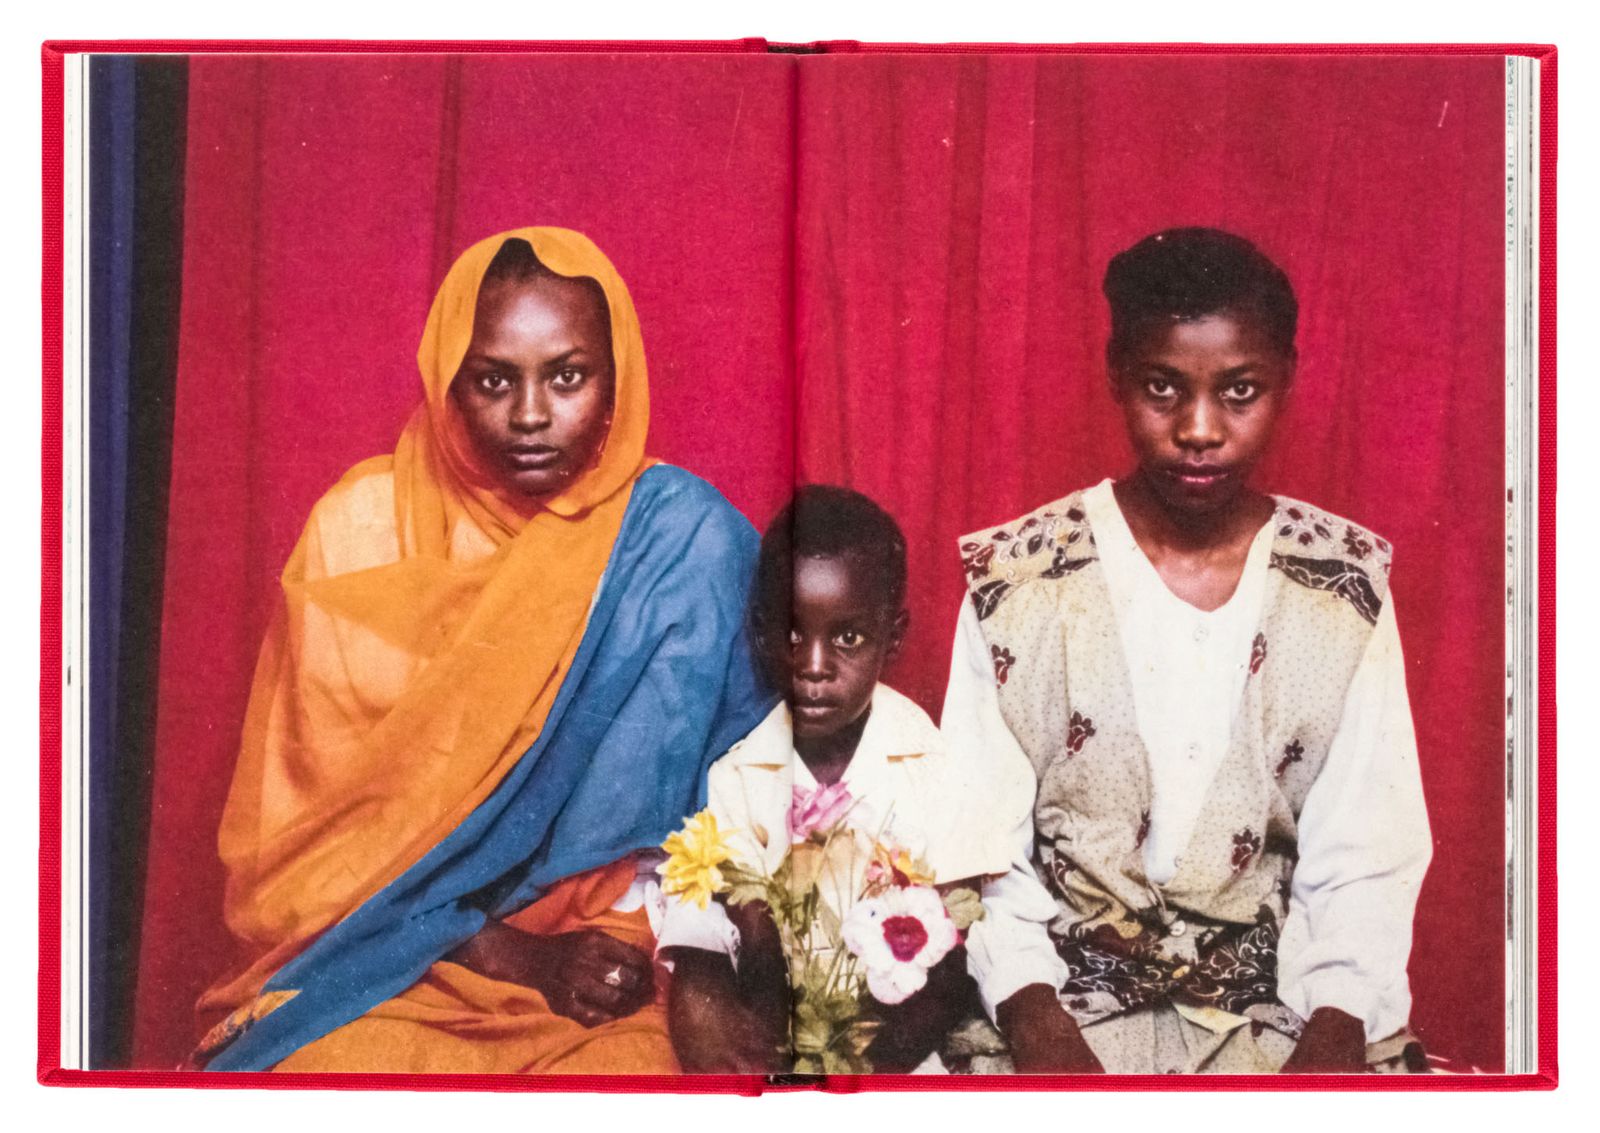 Photo Book Review: Salih Basheer Images from a Khartoum Childhood